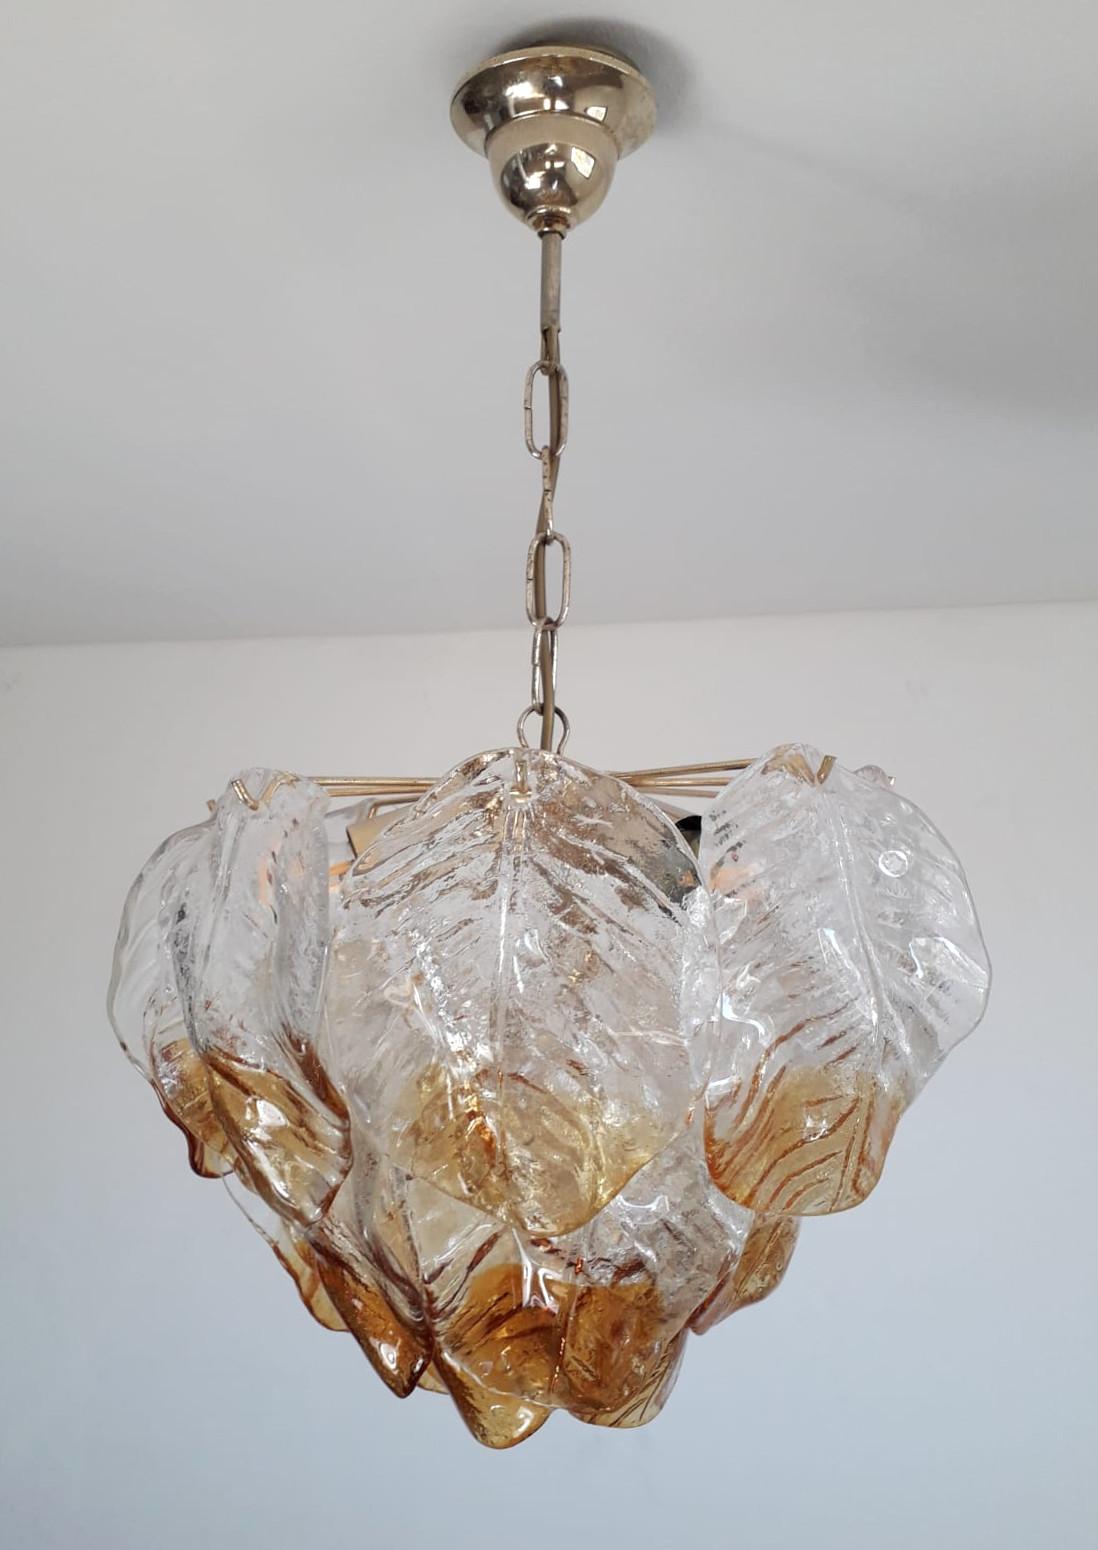 Vintage Italian chandelier with clear and amber hand blown textured Murano glass leaves suspended on brass frame / Made in Italy by Mazzega, circa 1960s
Measures: diameter 16 inches, chandelier height 14 inches, total height 26 inches including